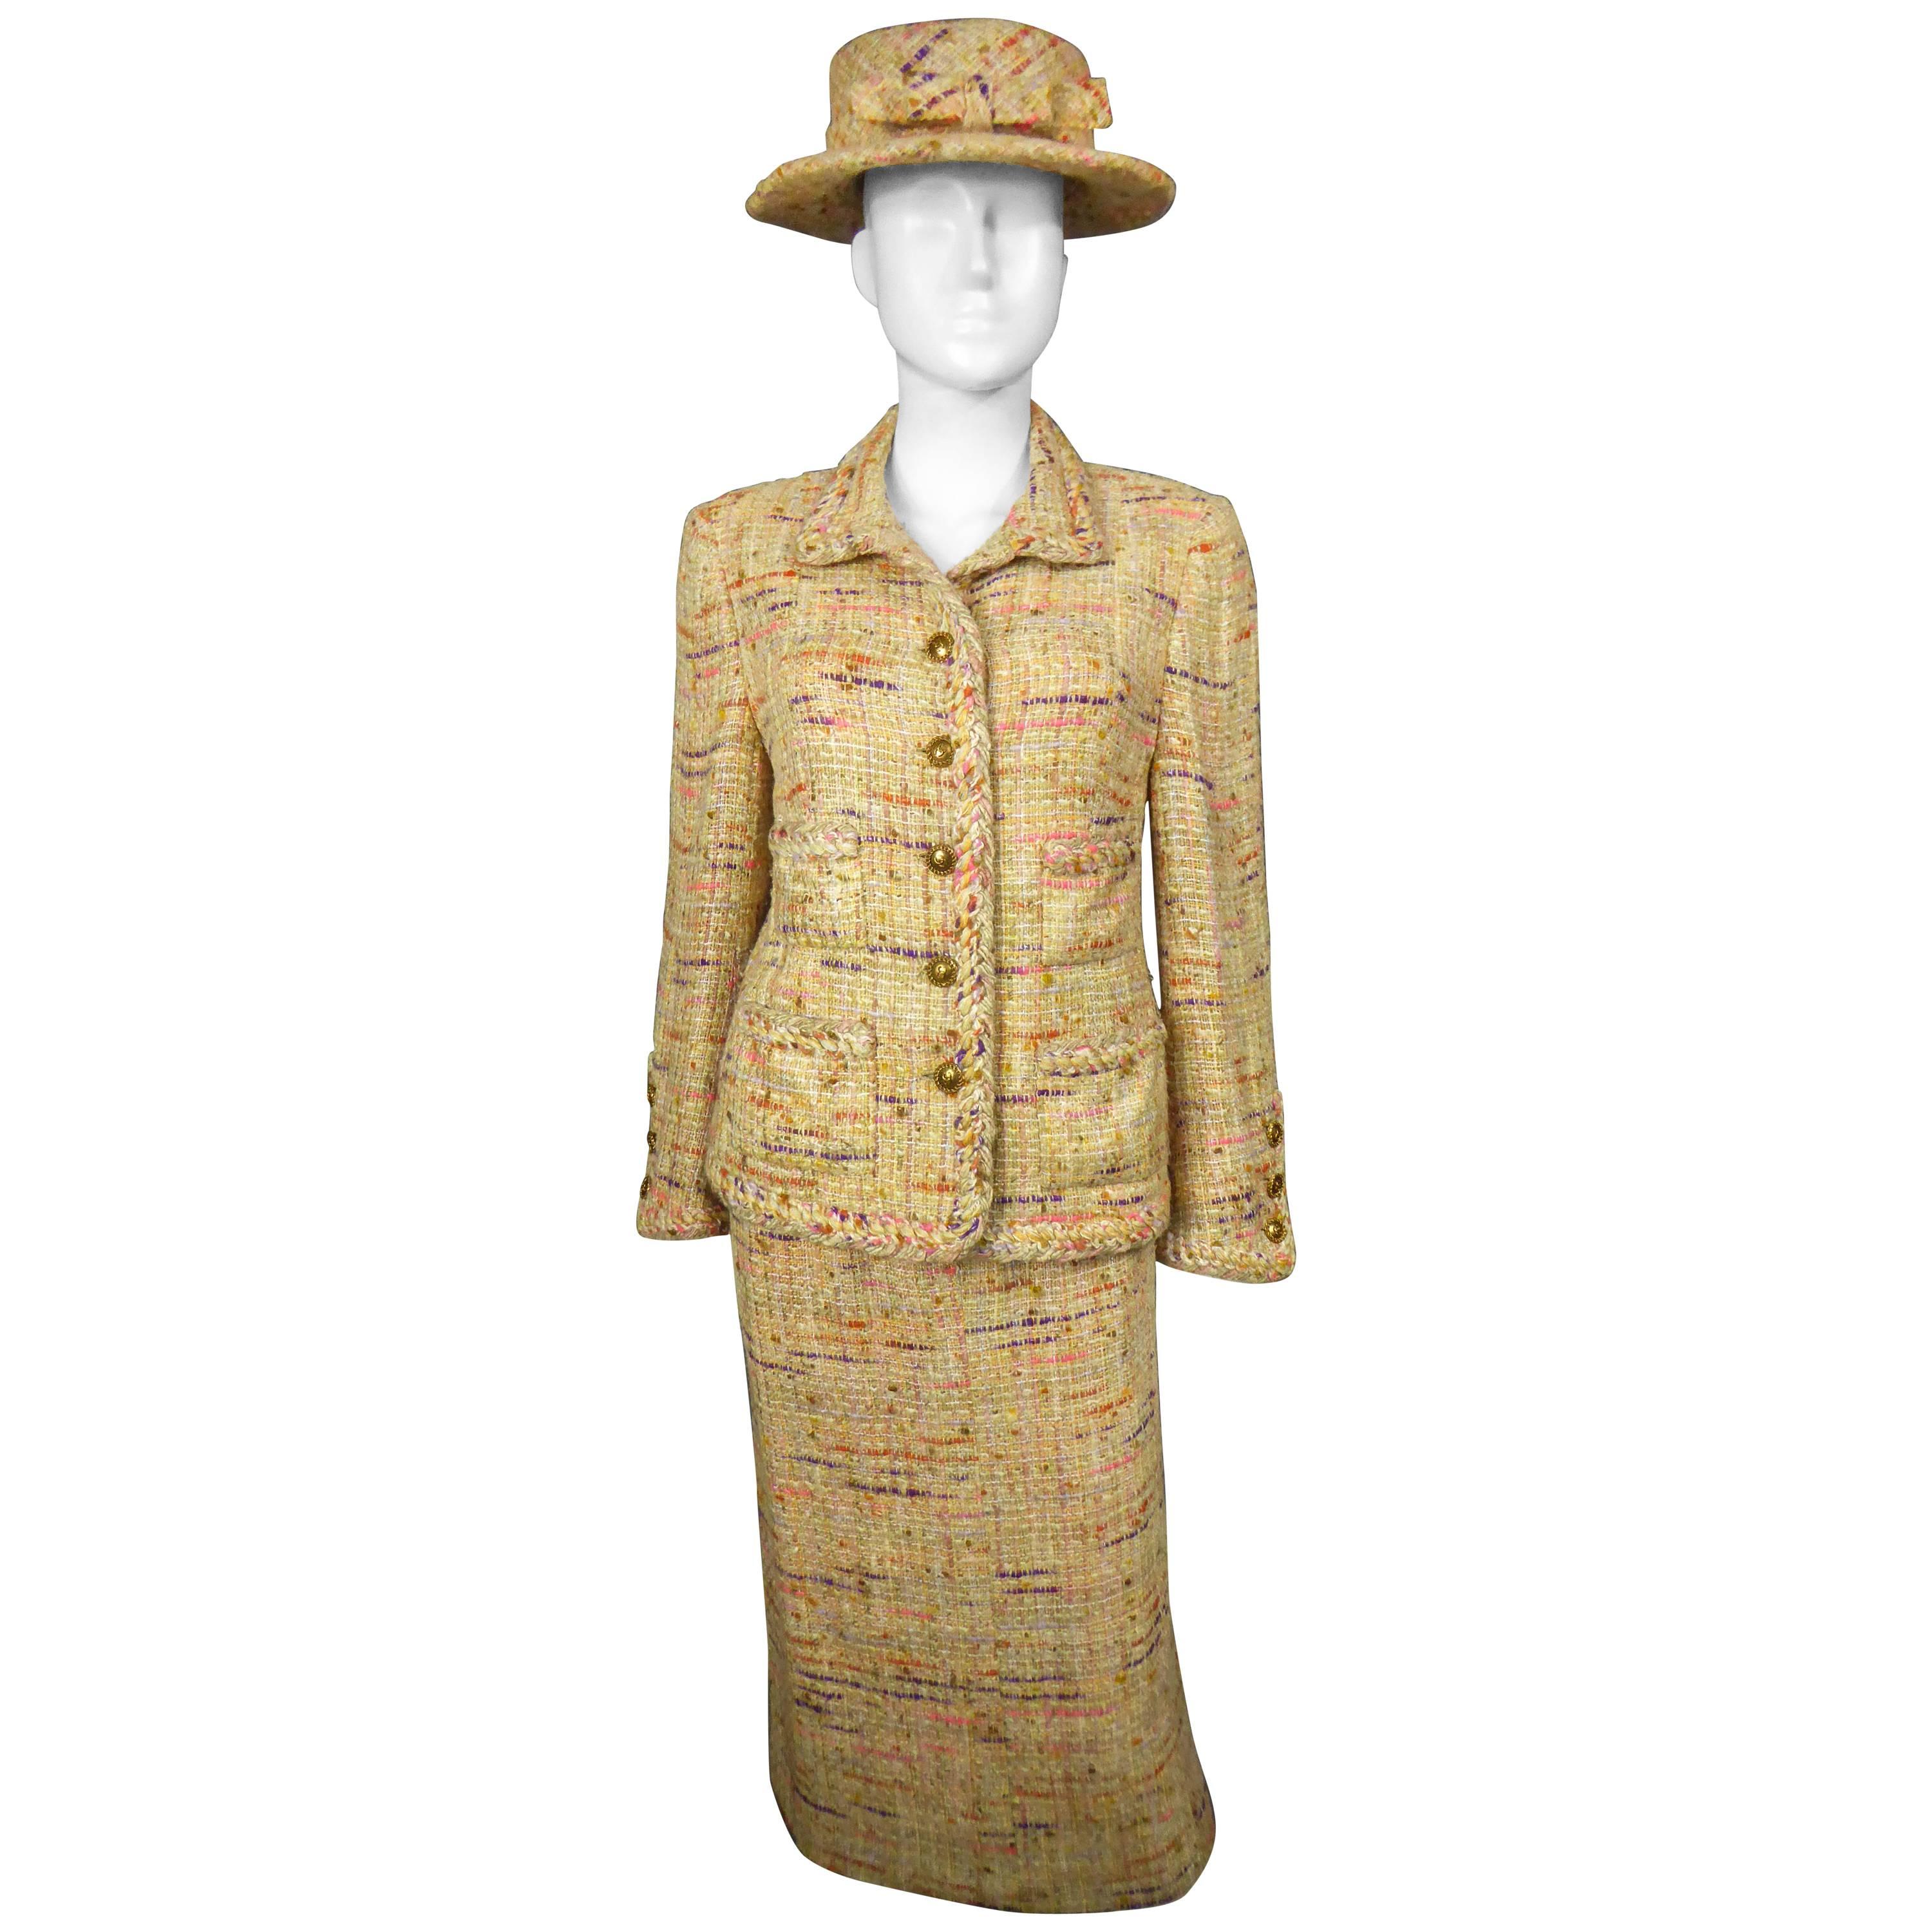 Chanel Haute Couture skirt and jacket suit numbered 02554 and